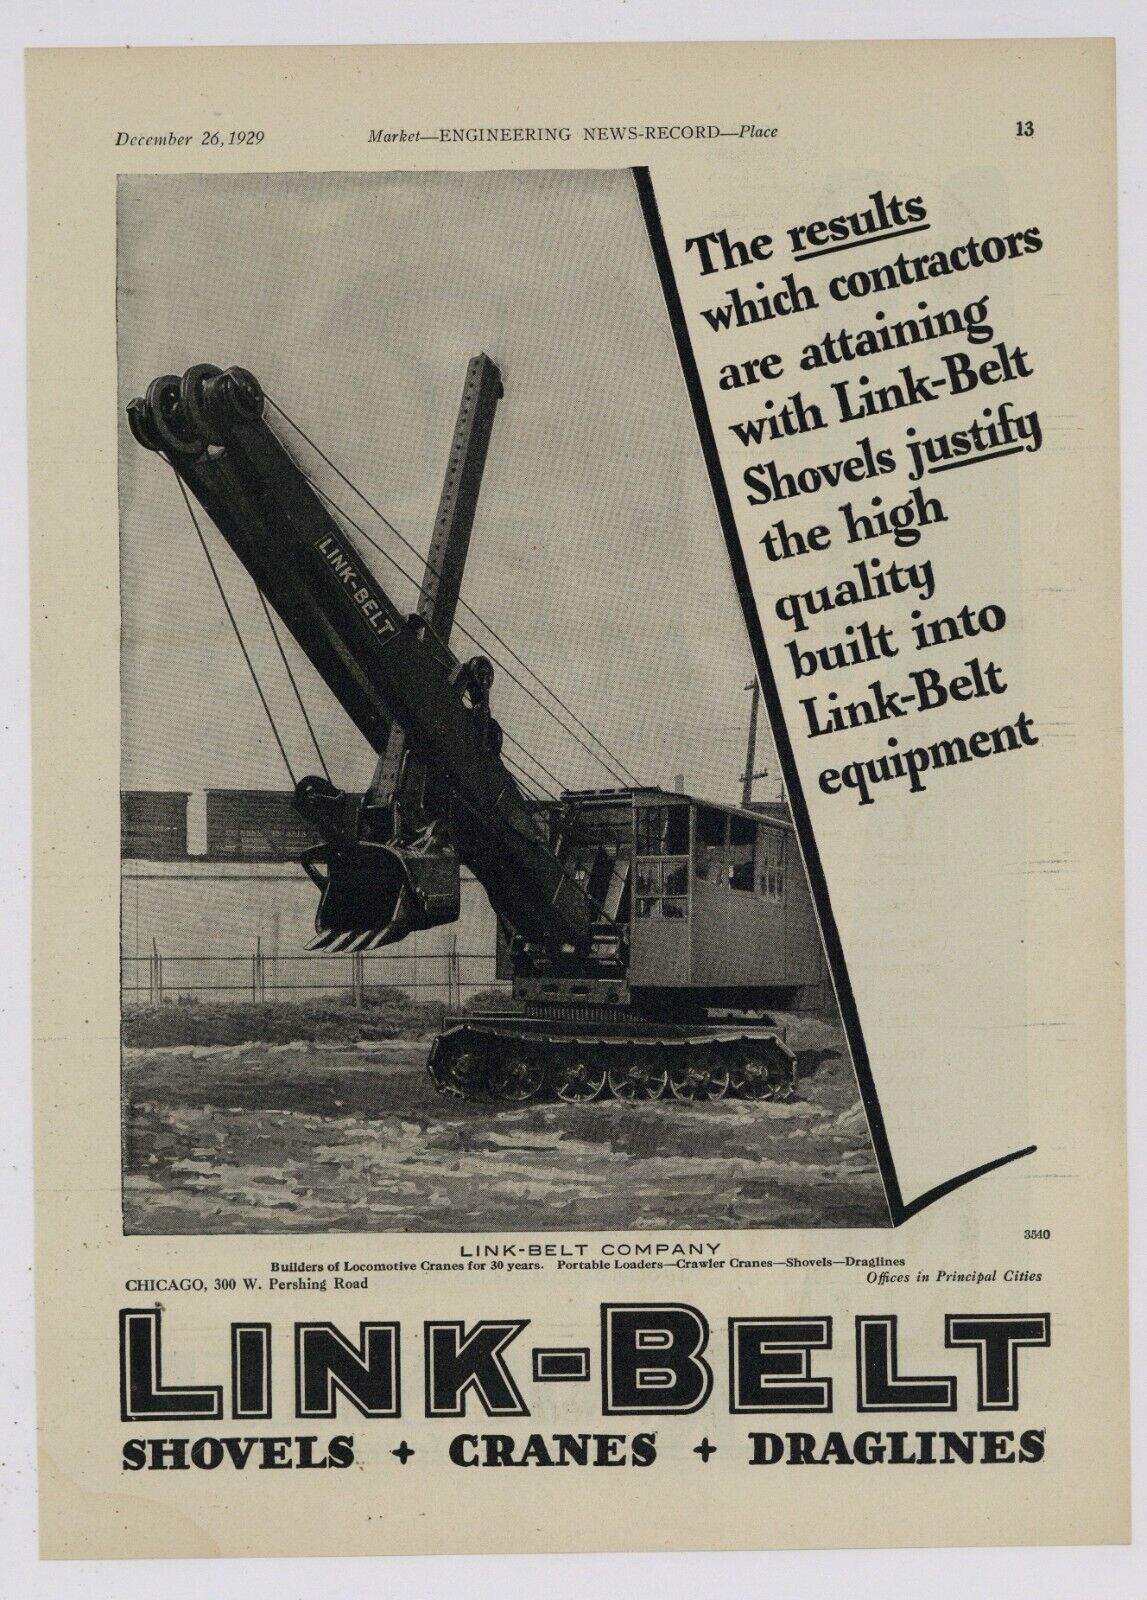 1929 Link Belt Co. Ad: Results Justify the High Quality Built into LB Equipment